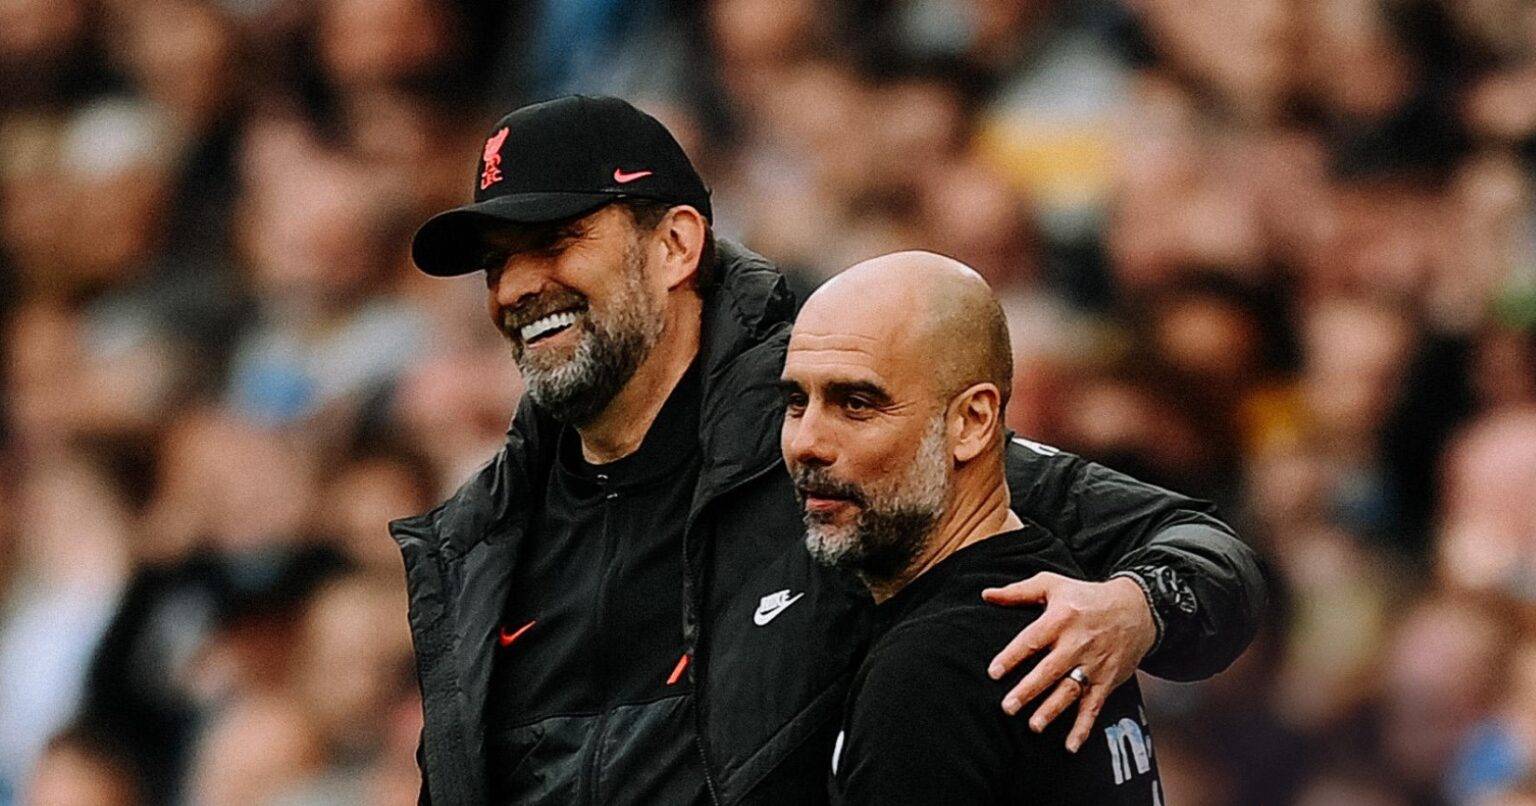 In Review: Klopp and Guardiola’s last dance, after ushering in a golden era of English football 